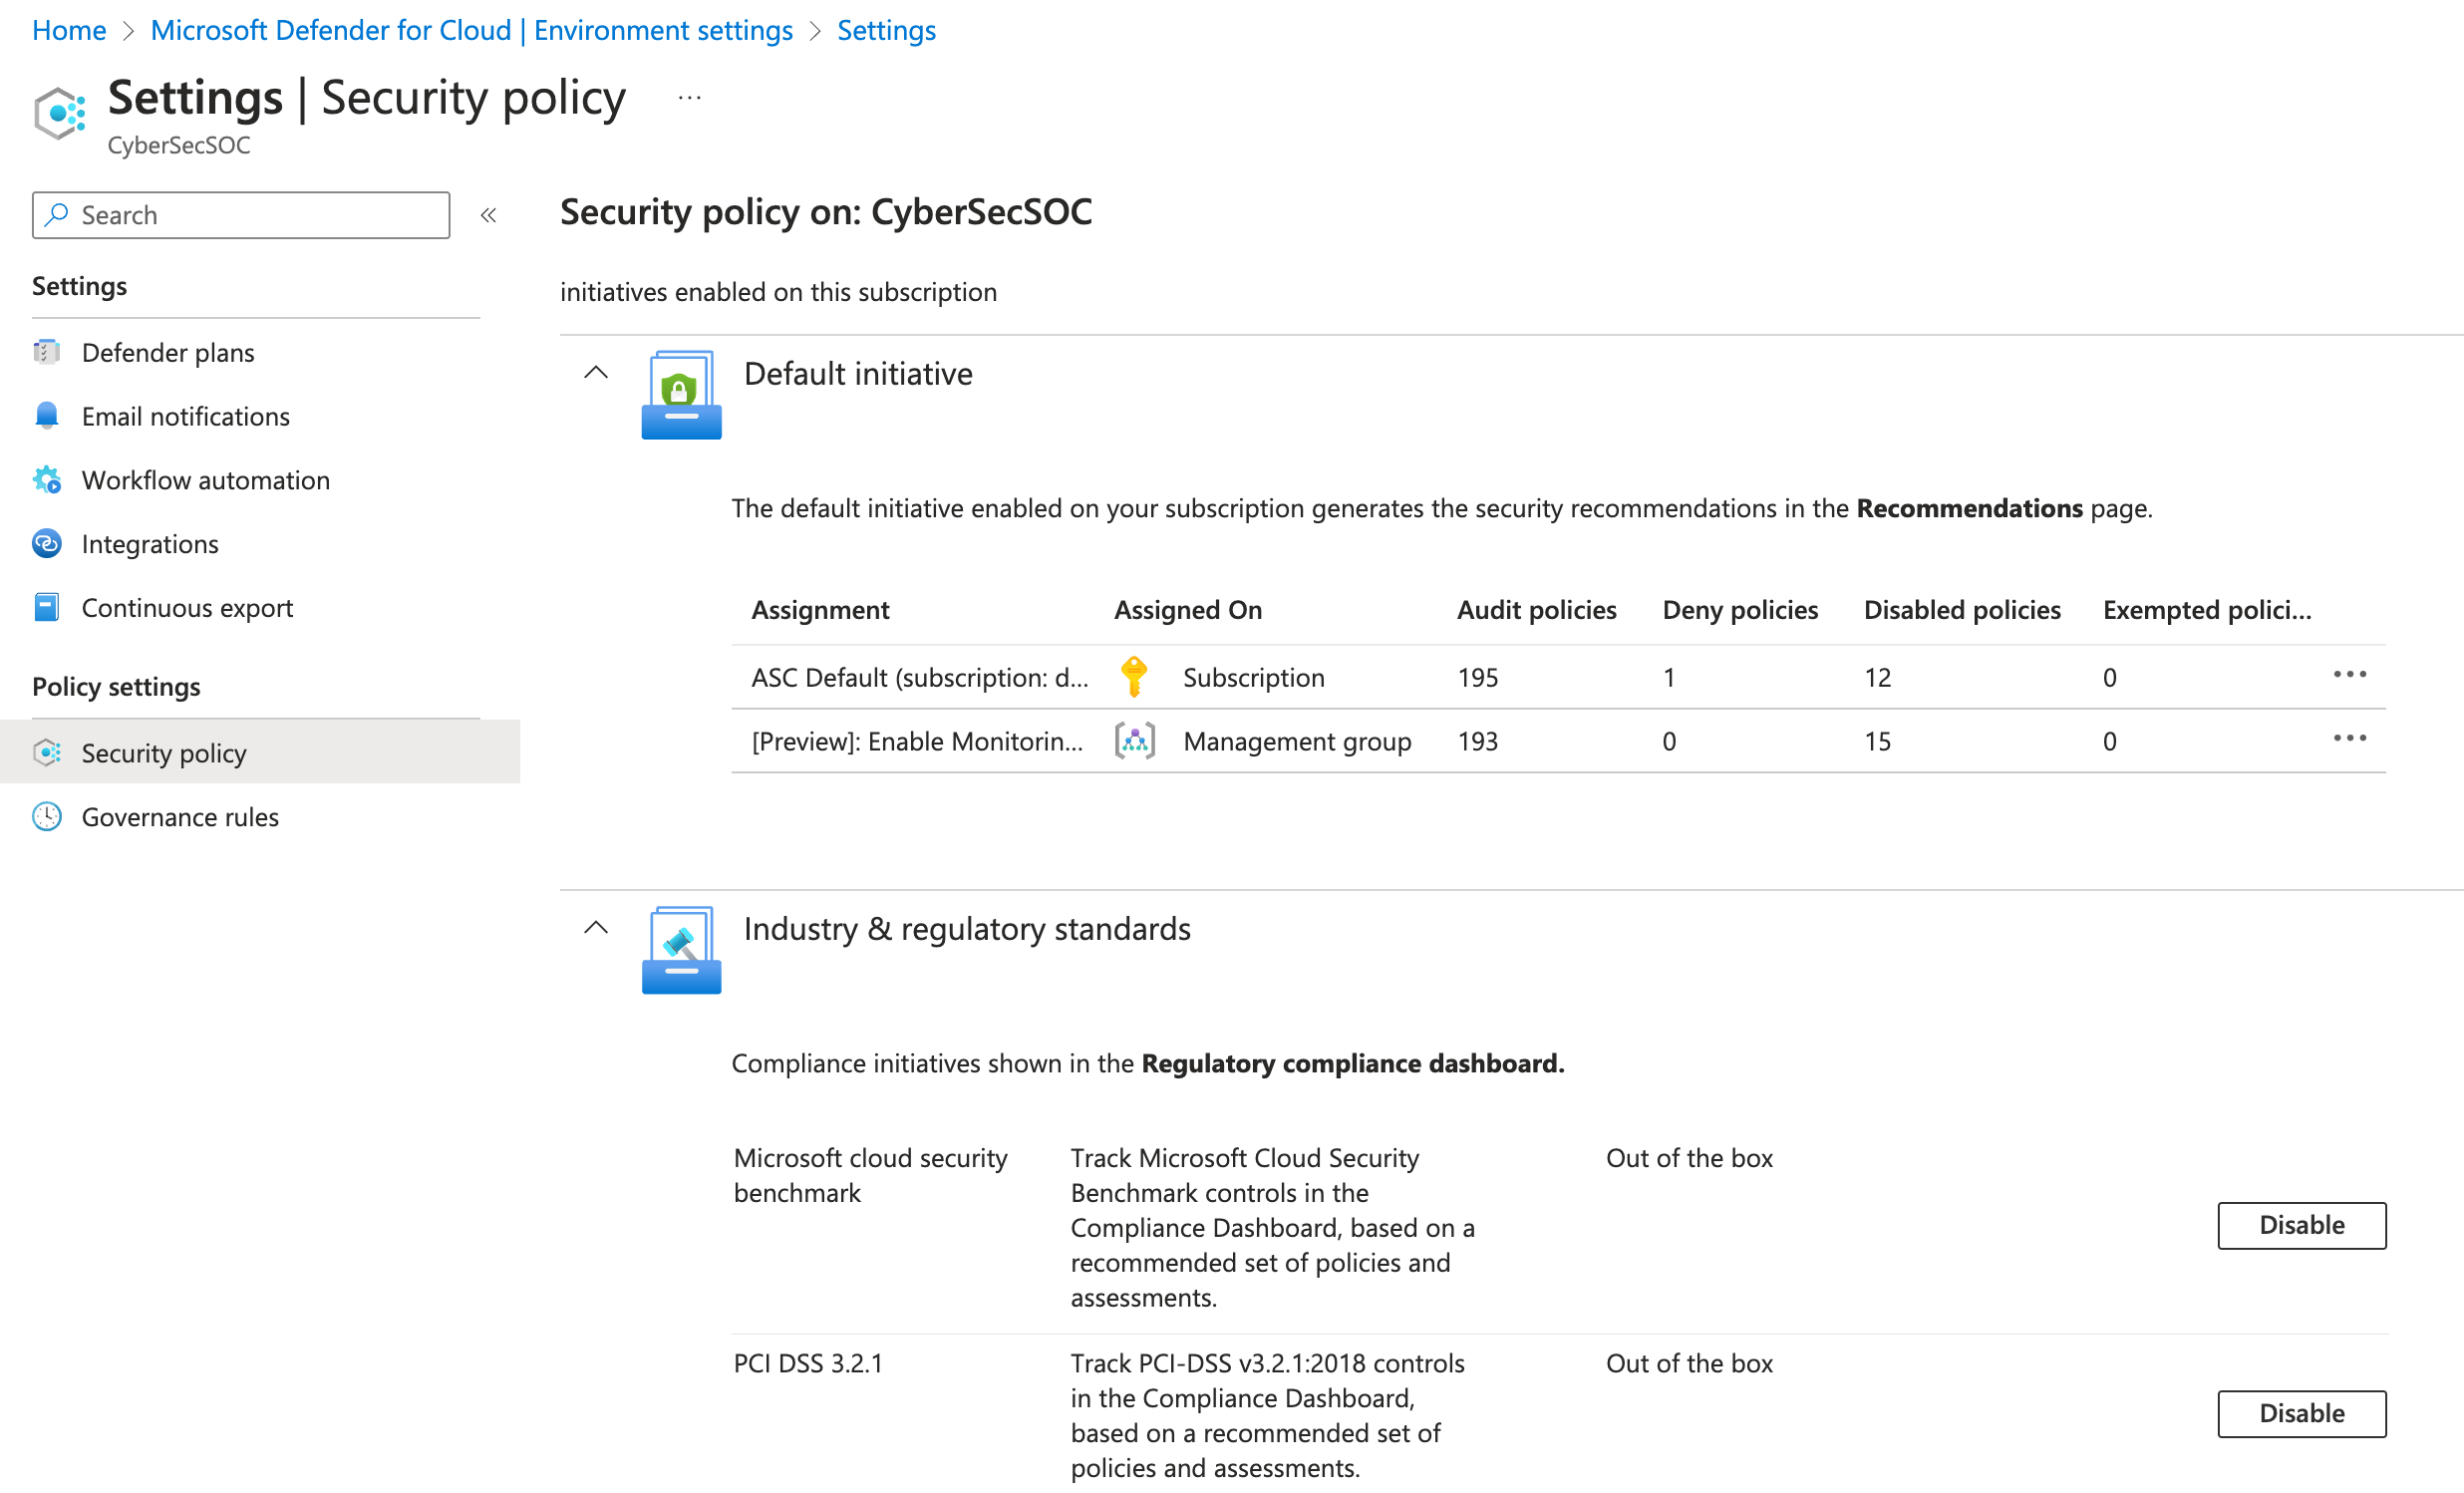 Defender for Cloud's security policy page